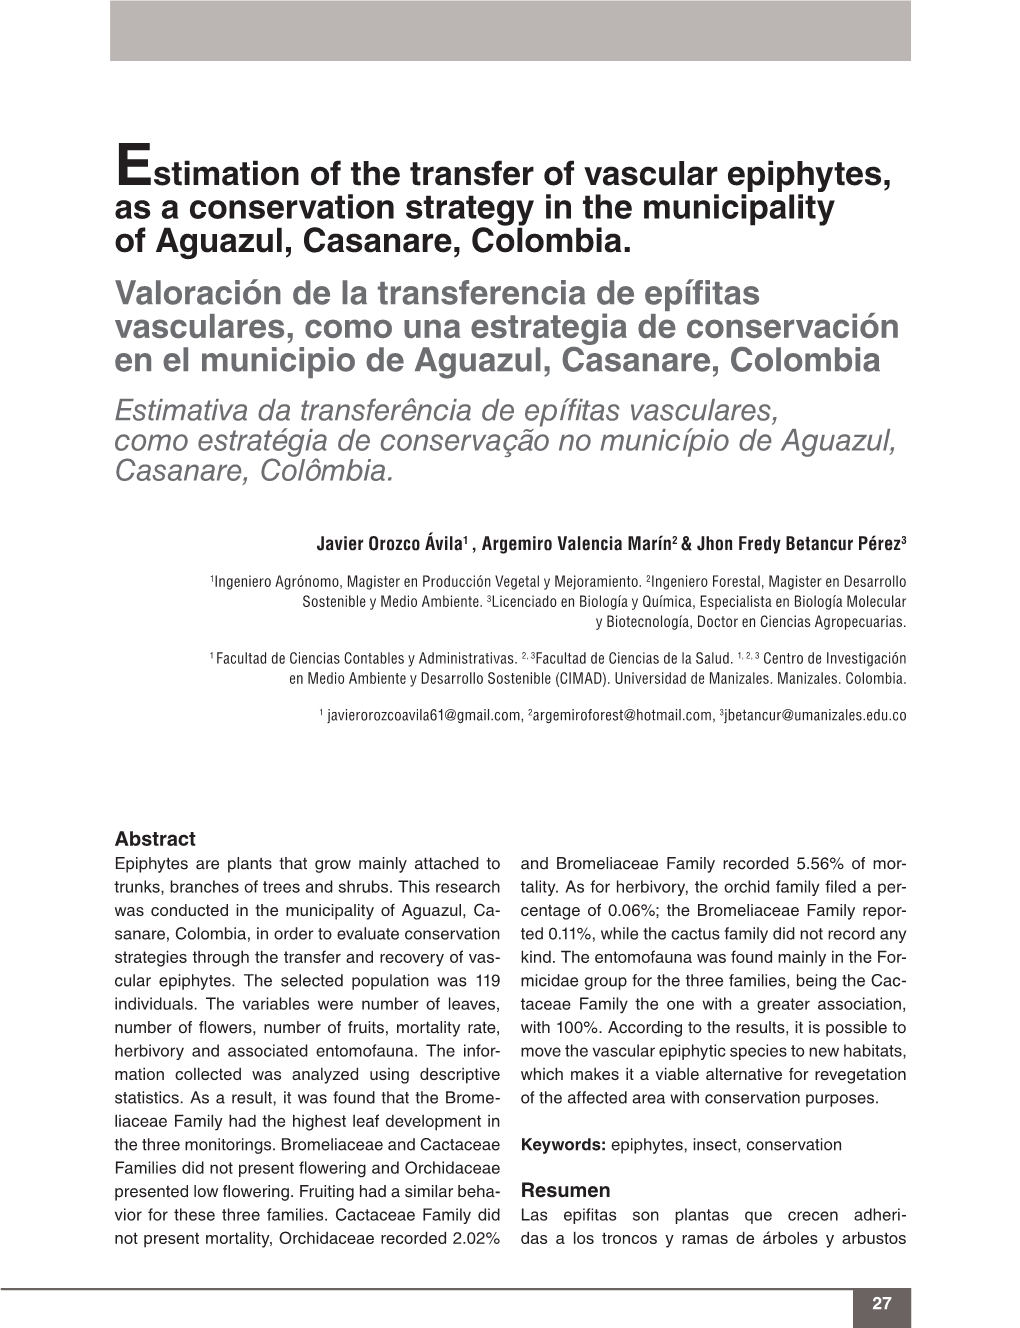 Estimation of the Transfer of Vascular Epiphytes, As a Conservation Strategy in the Municipality of Aguazul, Casanare, Colombia